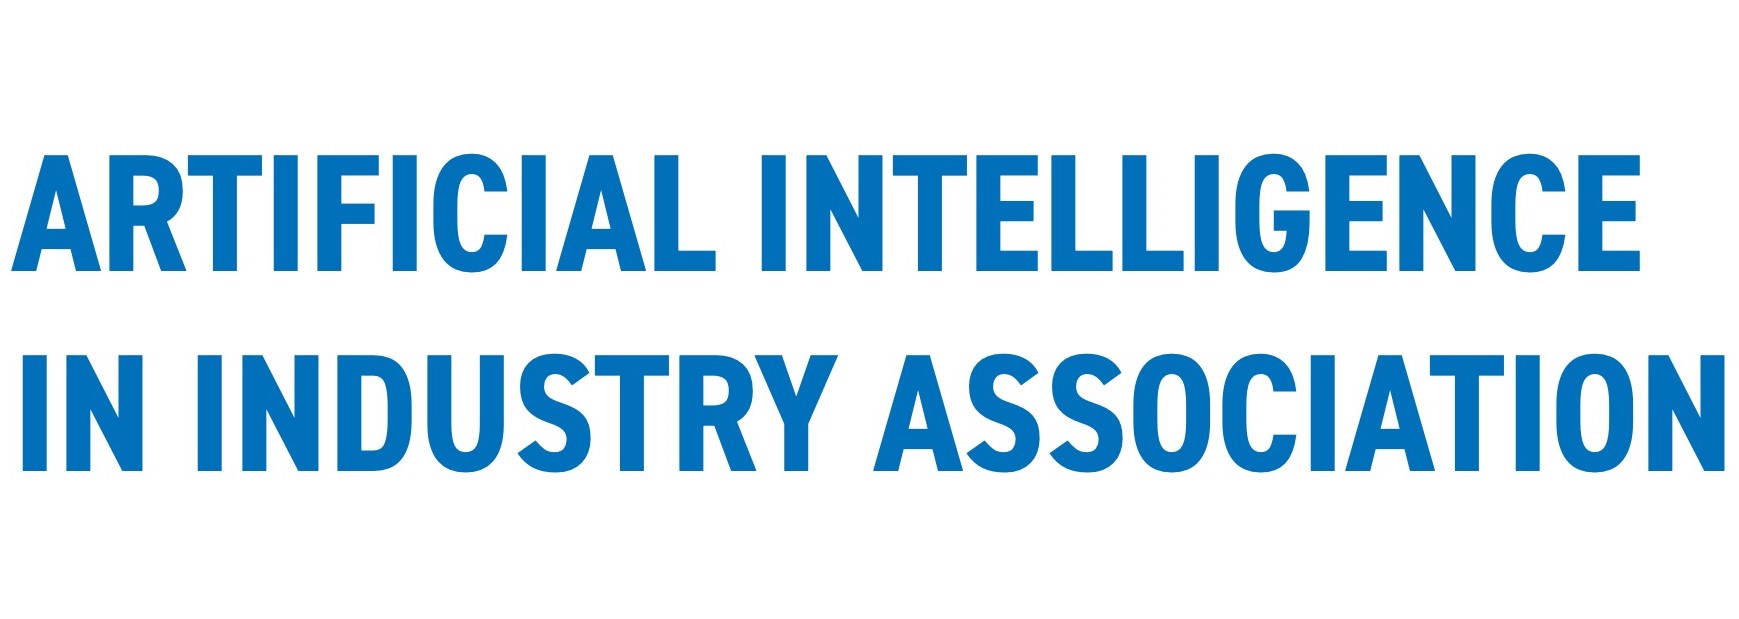 Artificial Intelligence in Industry